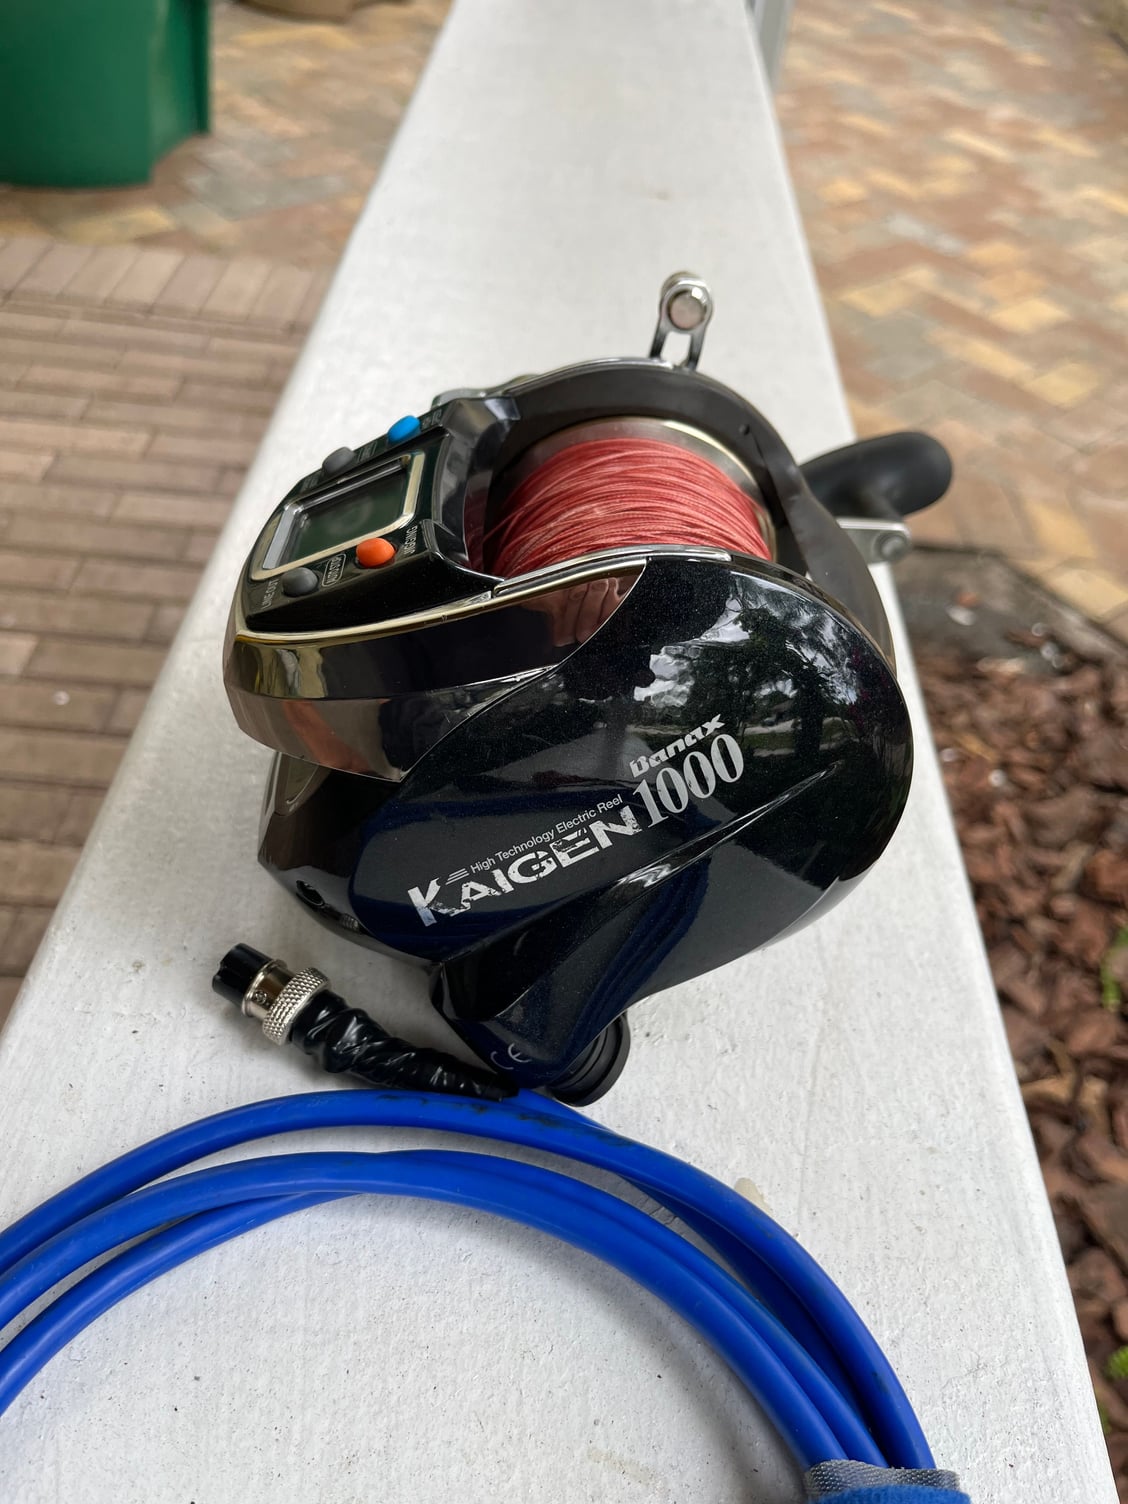 Banax Kaigen 1000 electric reel - The Hull Truth - Boating and